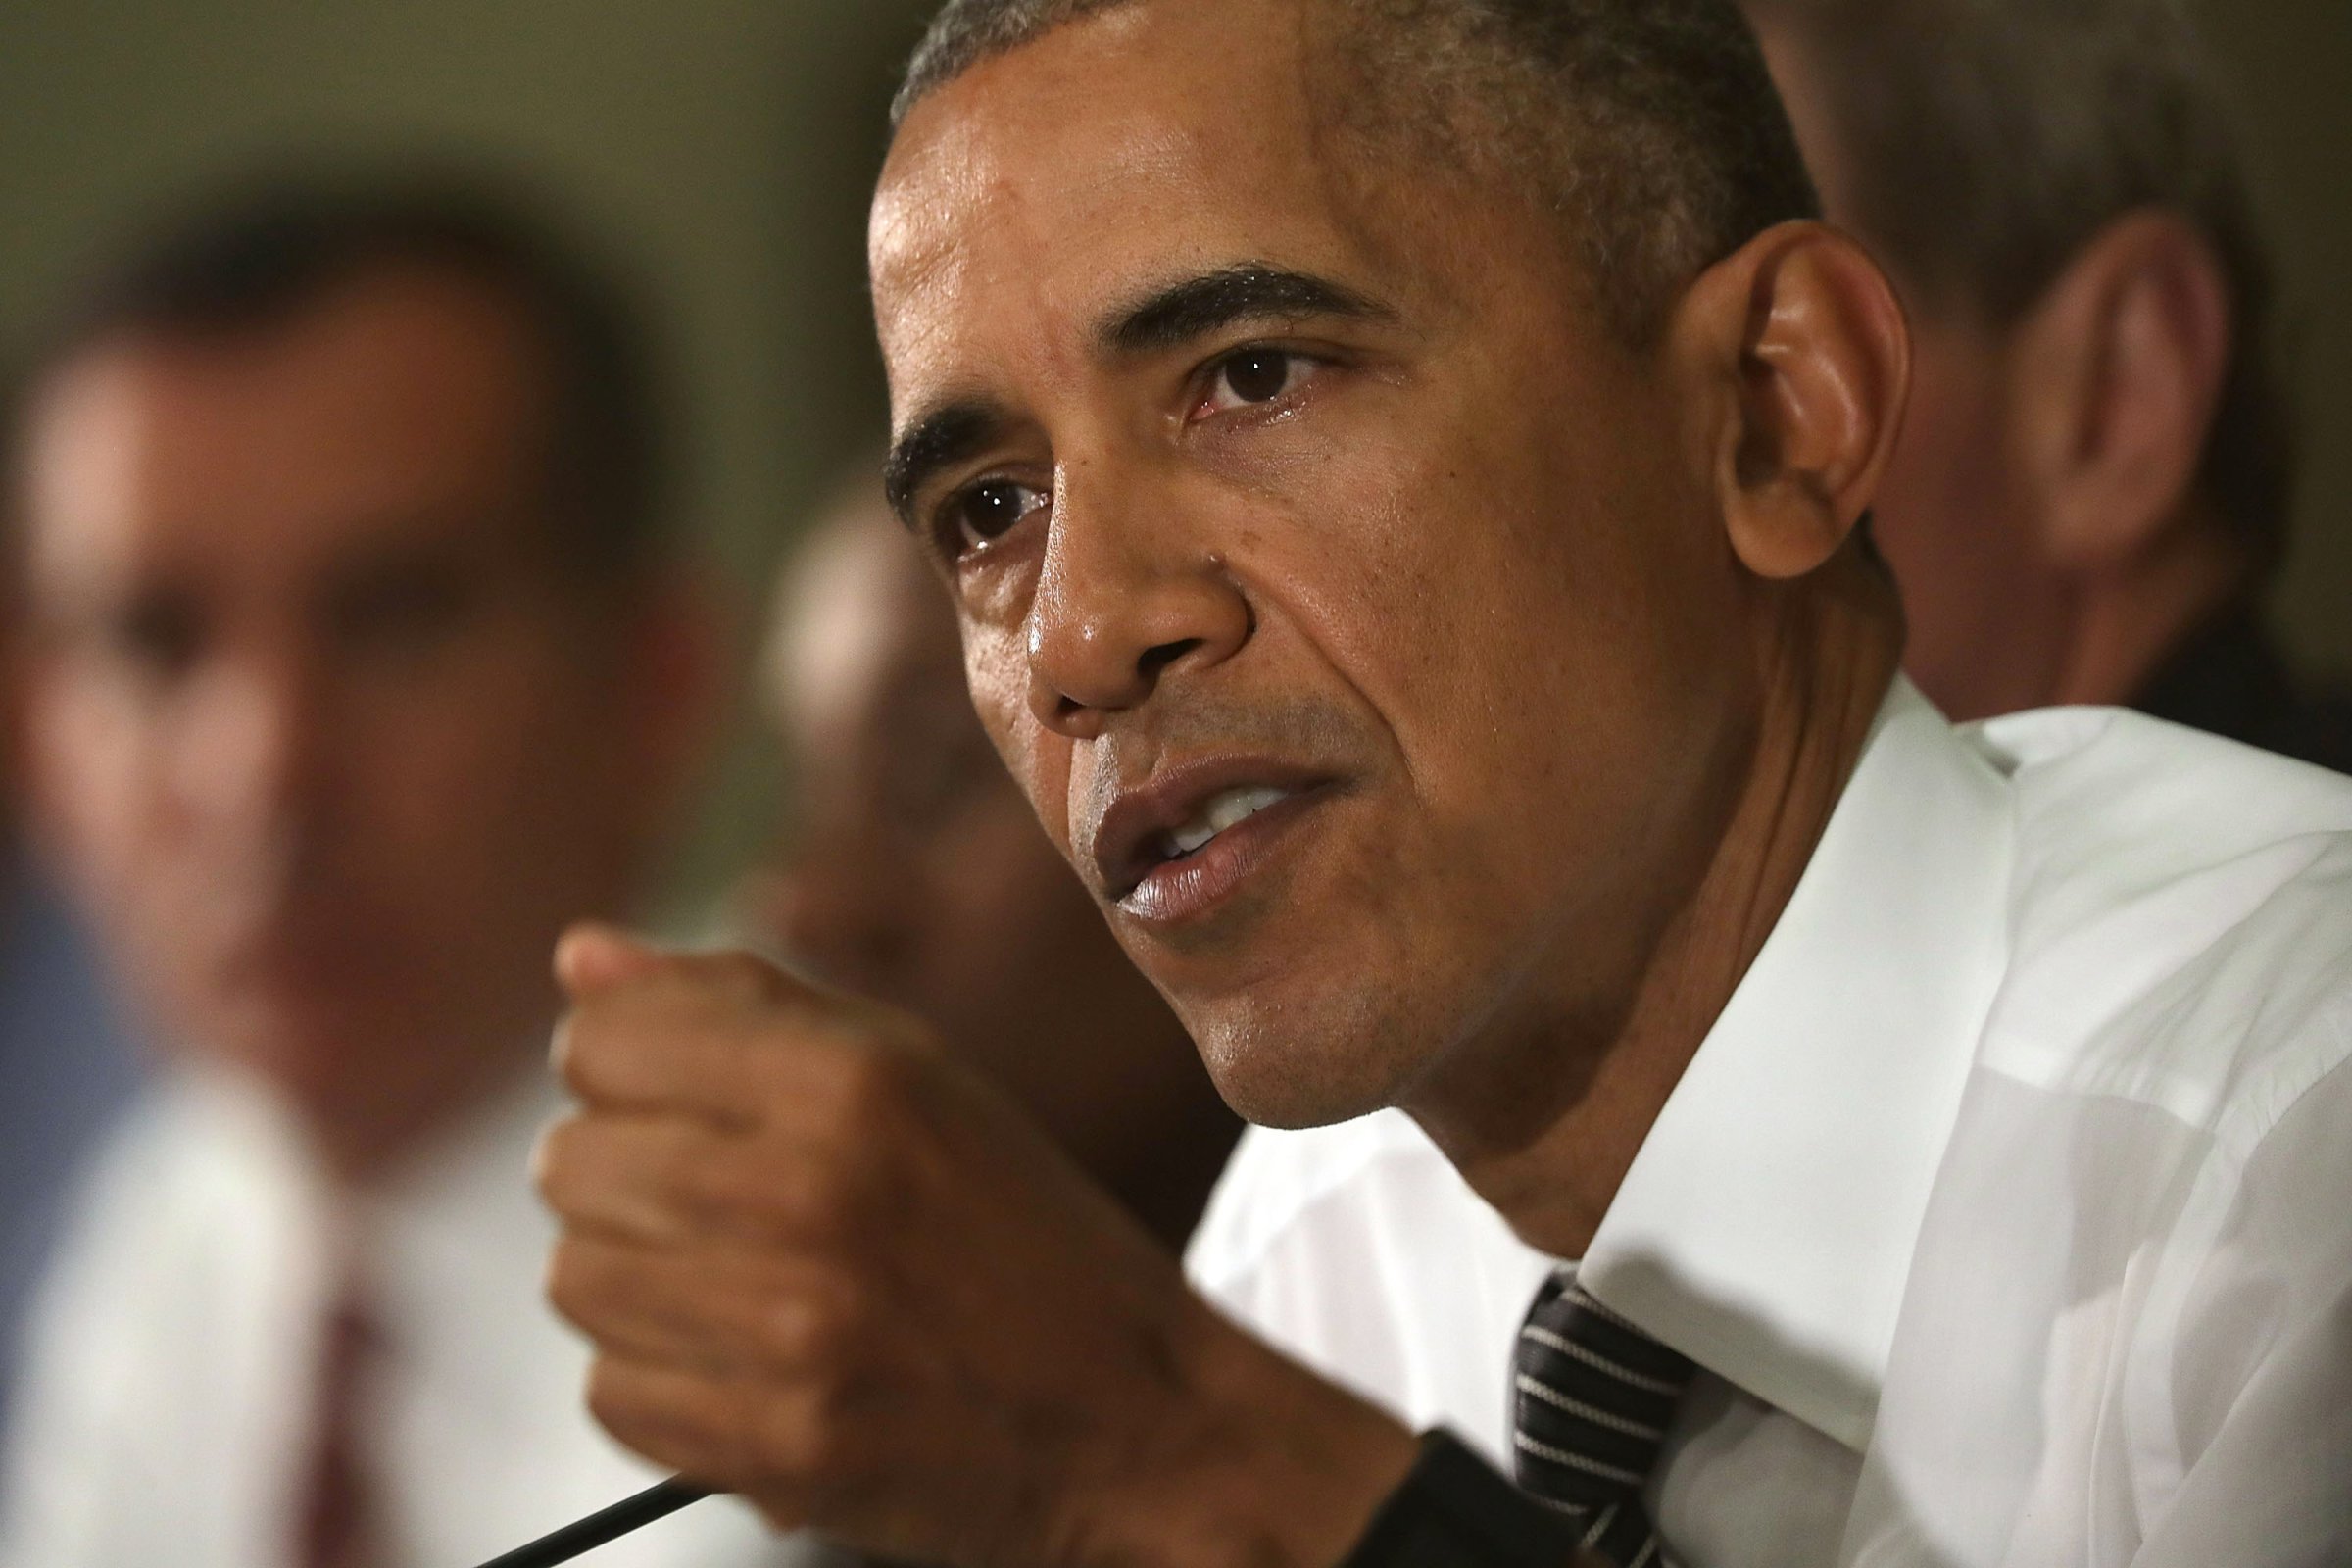 President Obama Hosts Conversation On Community Policing And Criminal Justice At White House